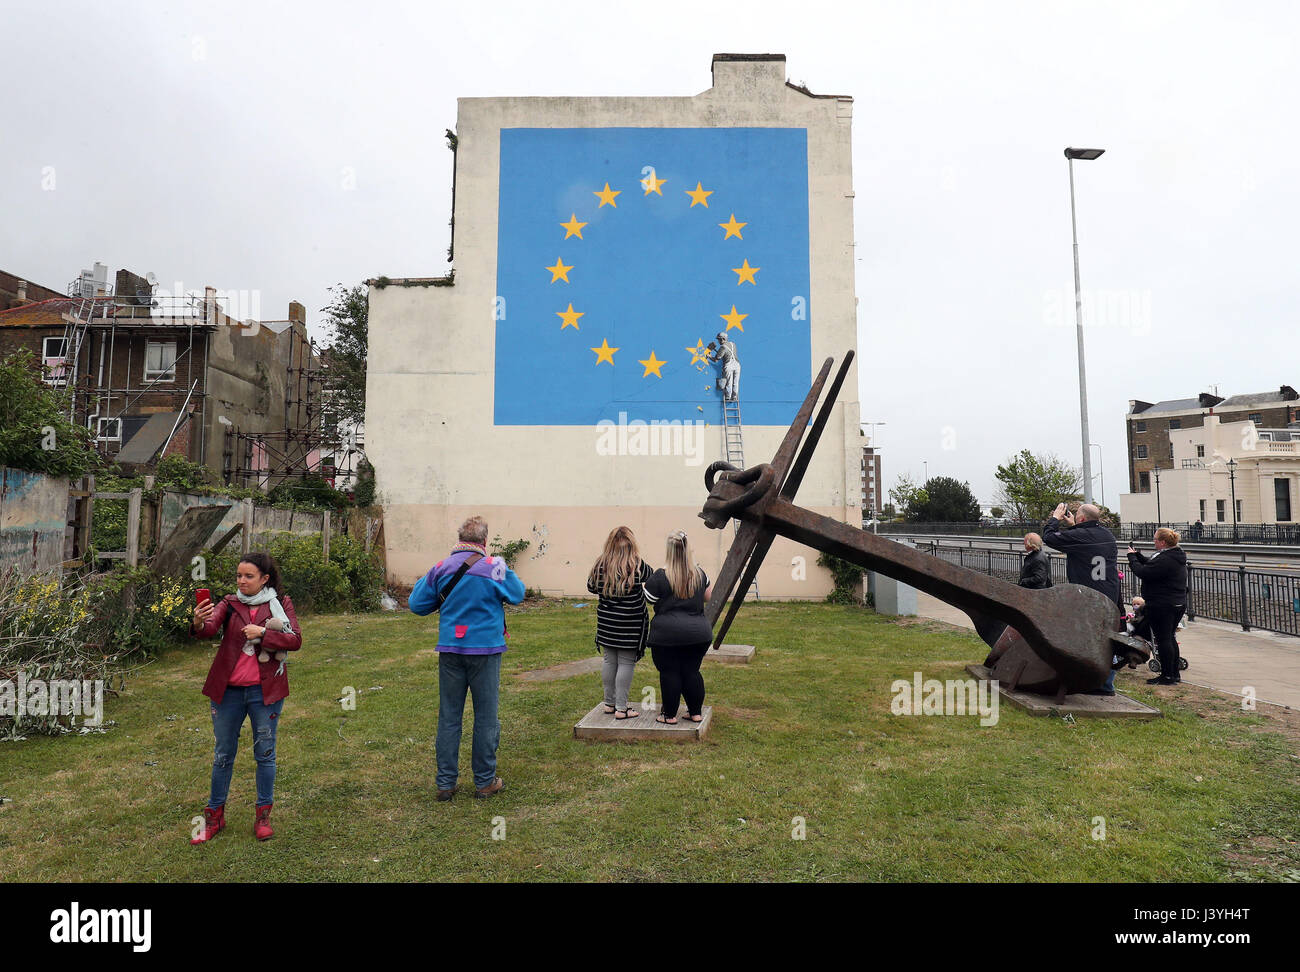 People stop to view a mural by artist Banksy of a workman removing a star from the EU flag which appeared yesterday near the ferry terminal in Dover, Kent. Stock Photo